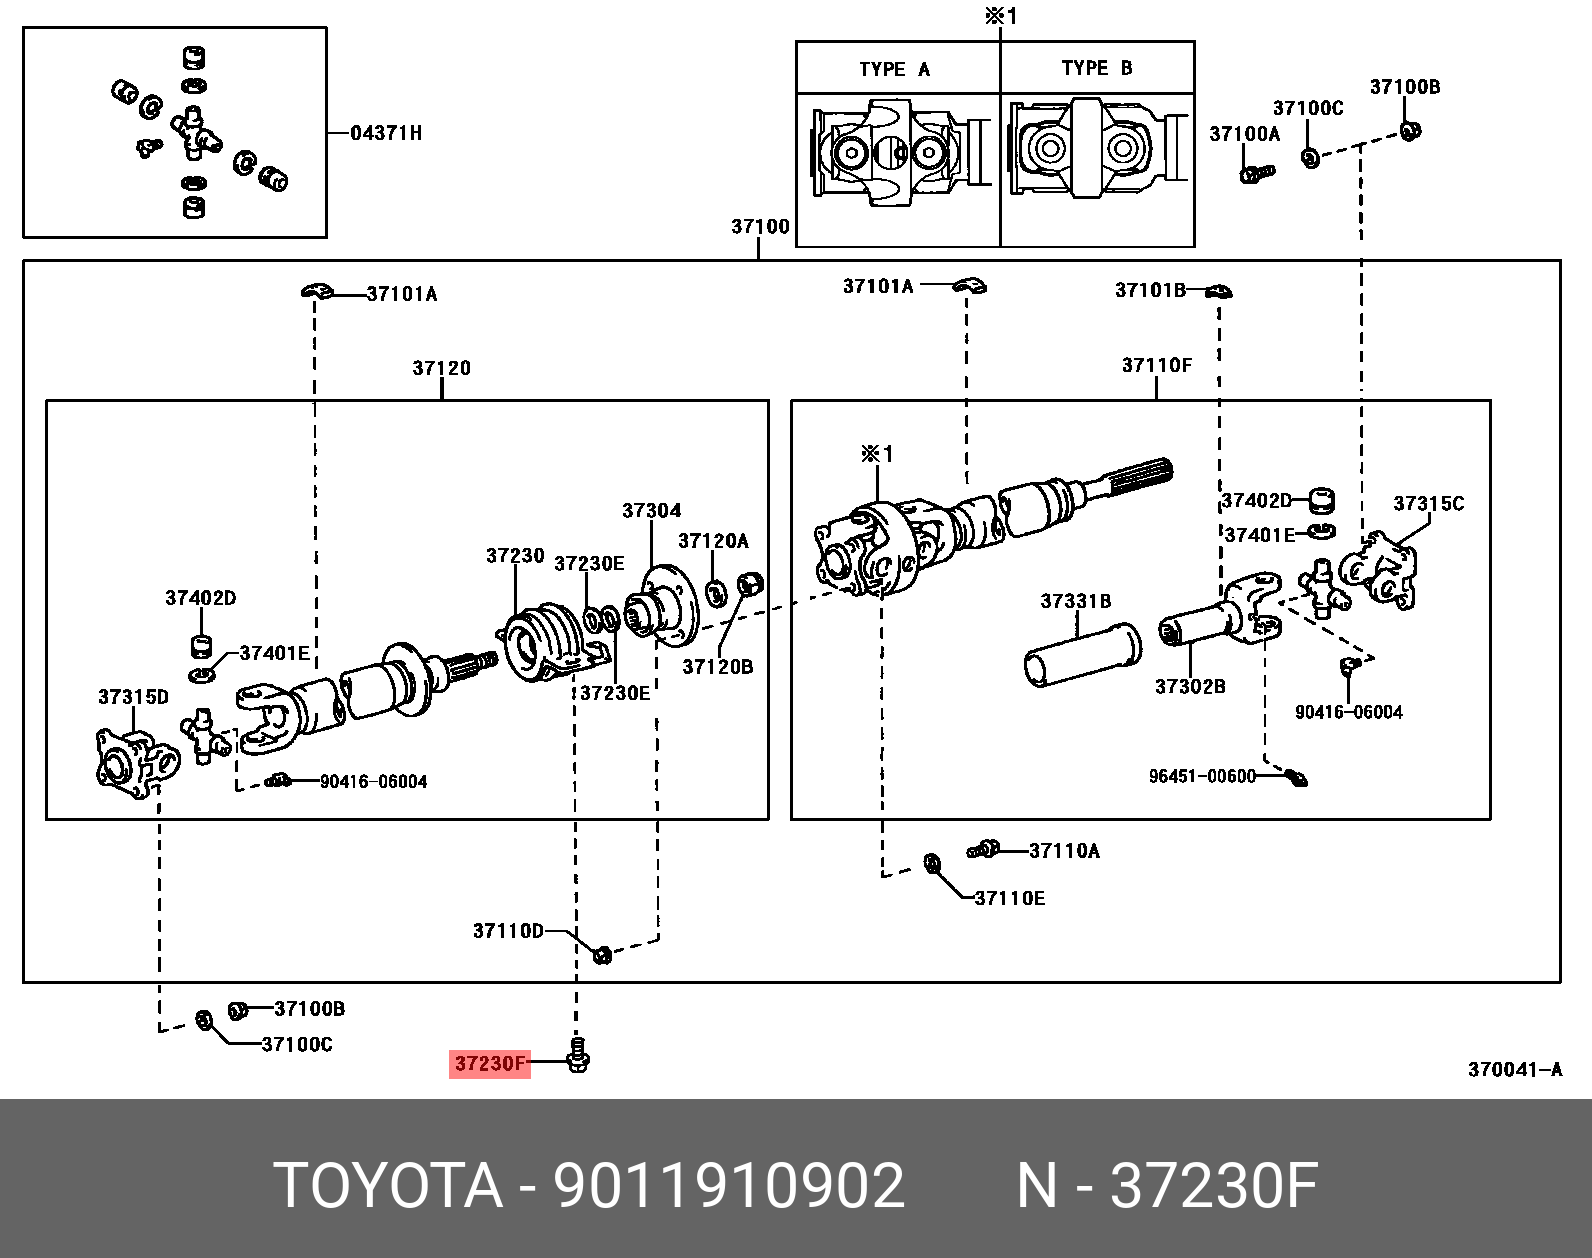 CROWN/HYBRID 201212 -, BOLT, NO.1 (FOR CENTER SUPPORT BEARING)